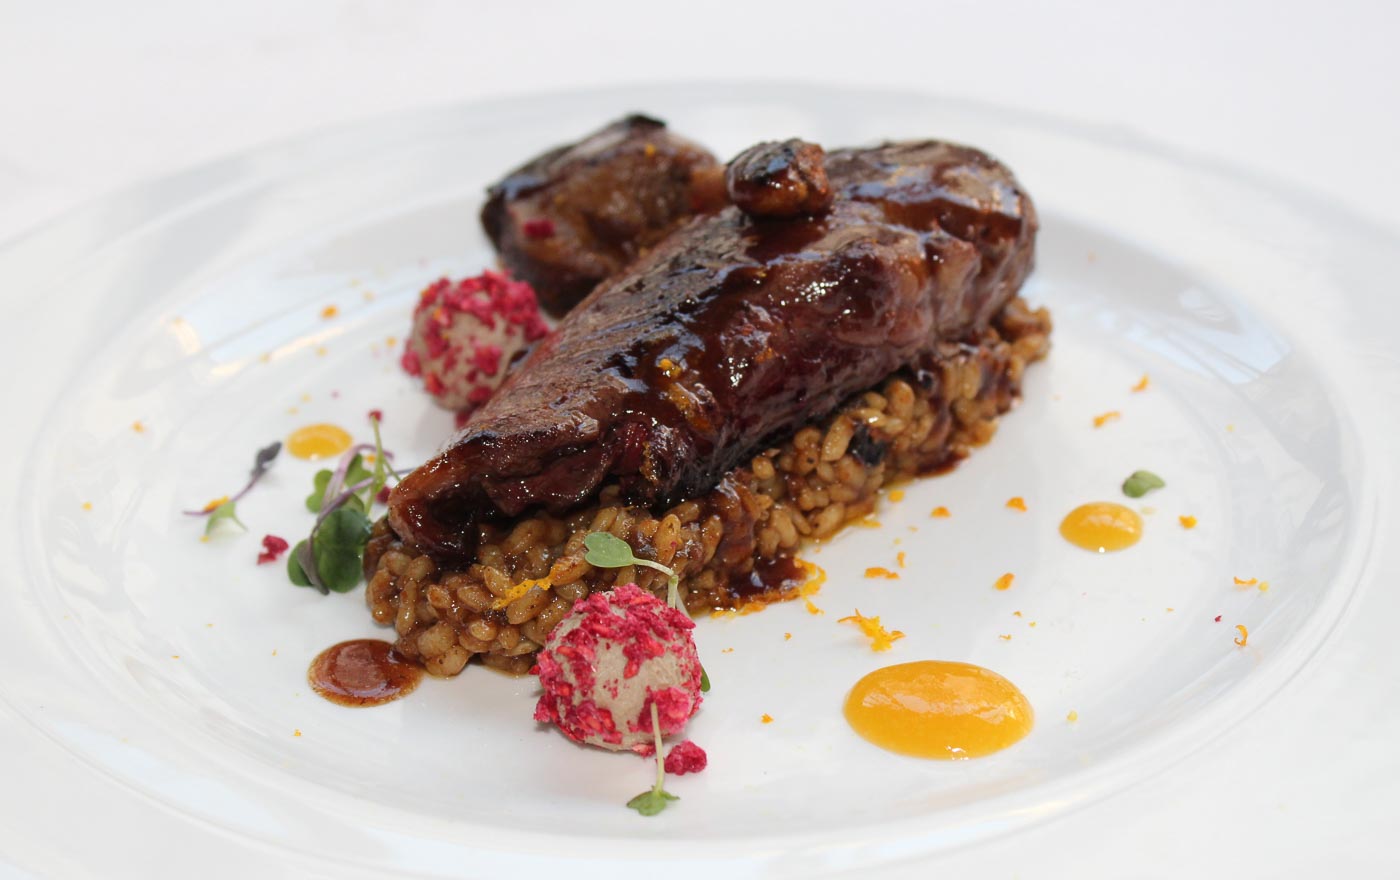 Duck with creamy rice and chocolate